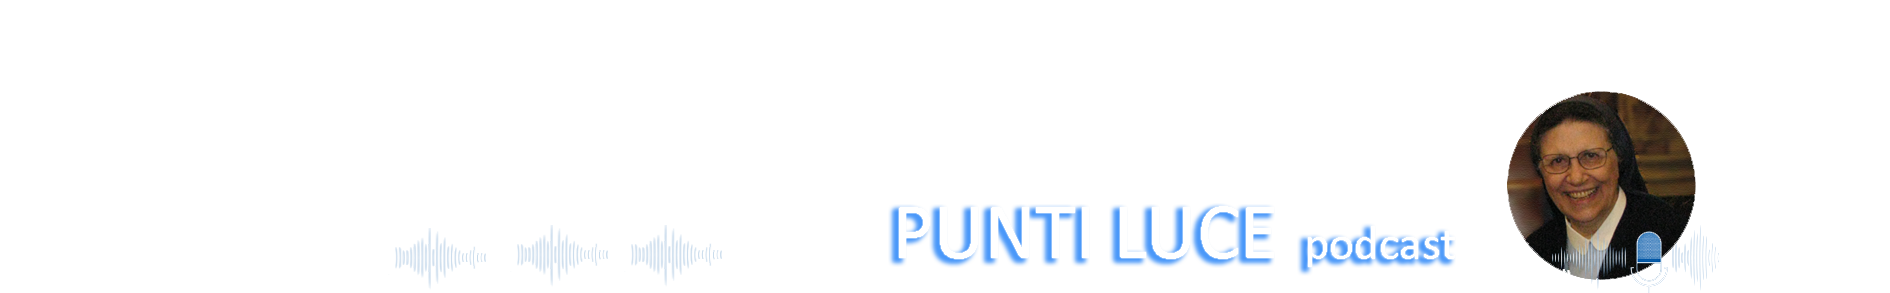 punti luce podcast cover